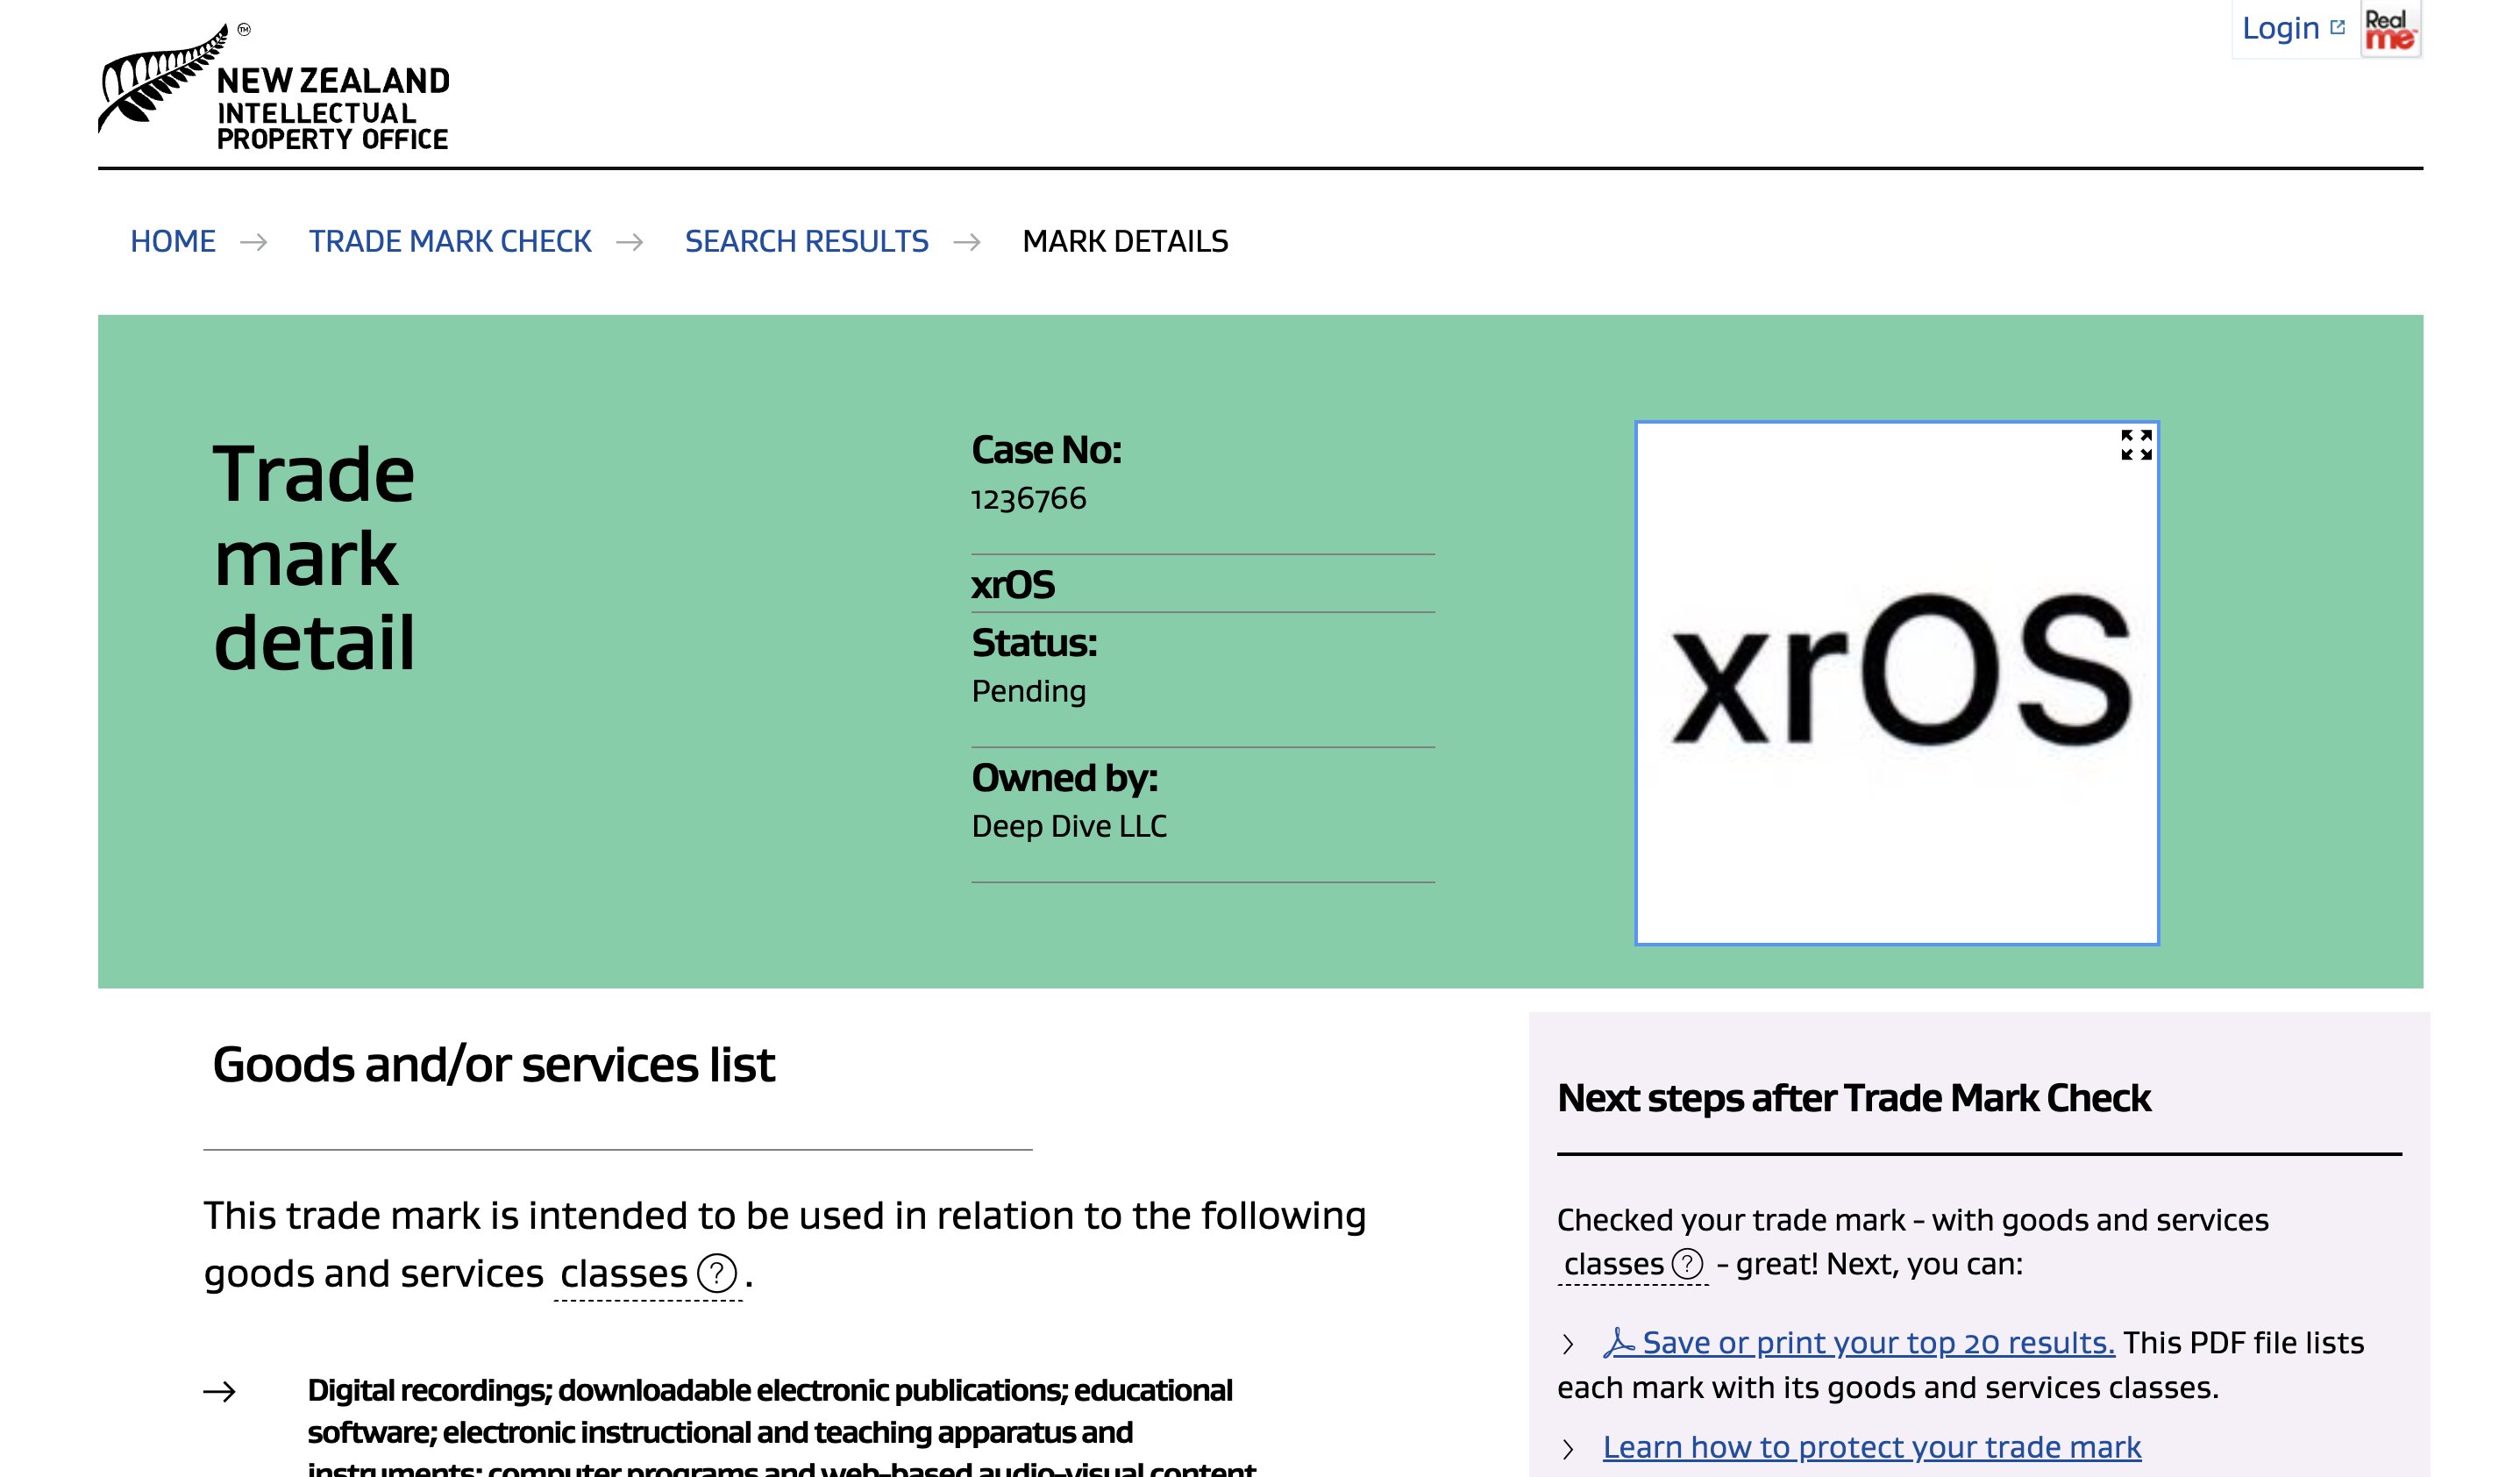 New 'xrOS' wordmark registered by Apple ahead of AR/VR headset announcement